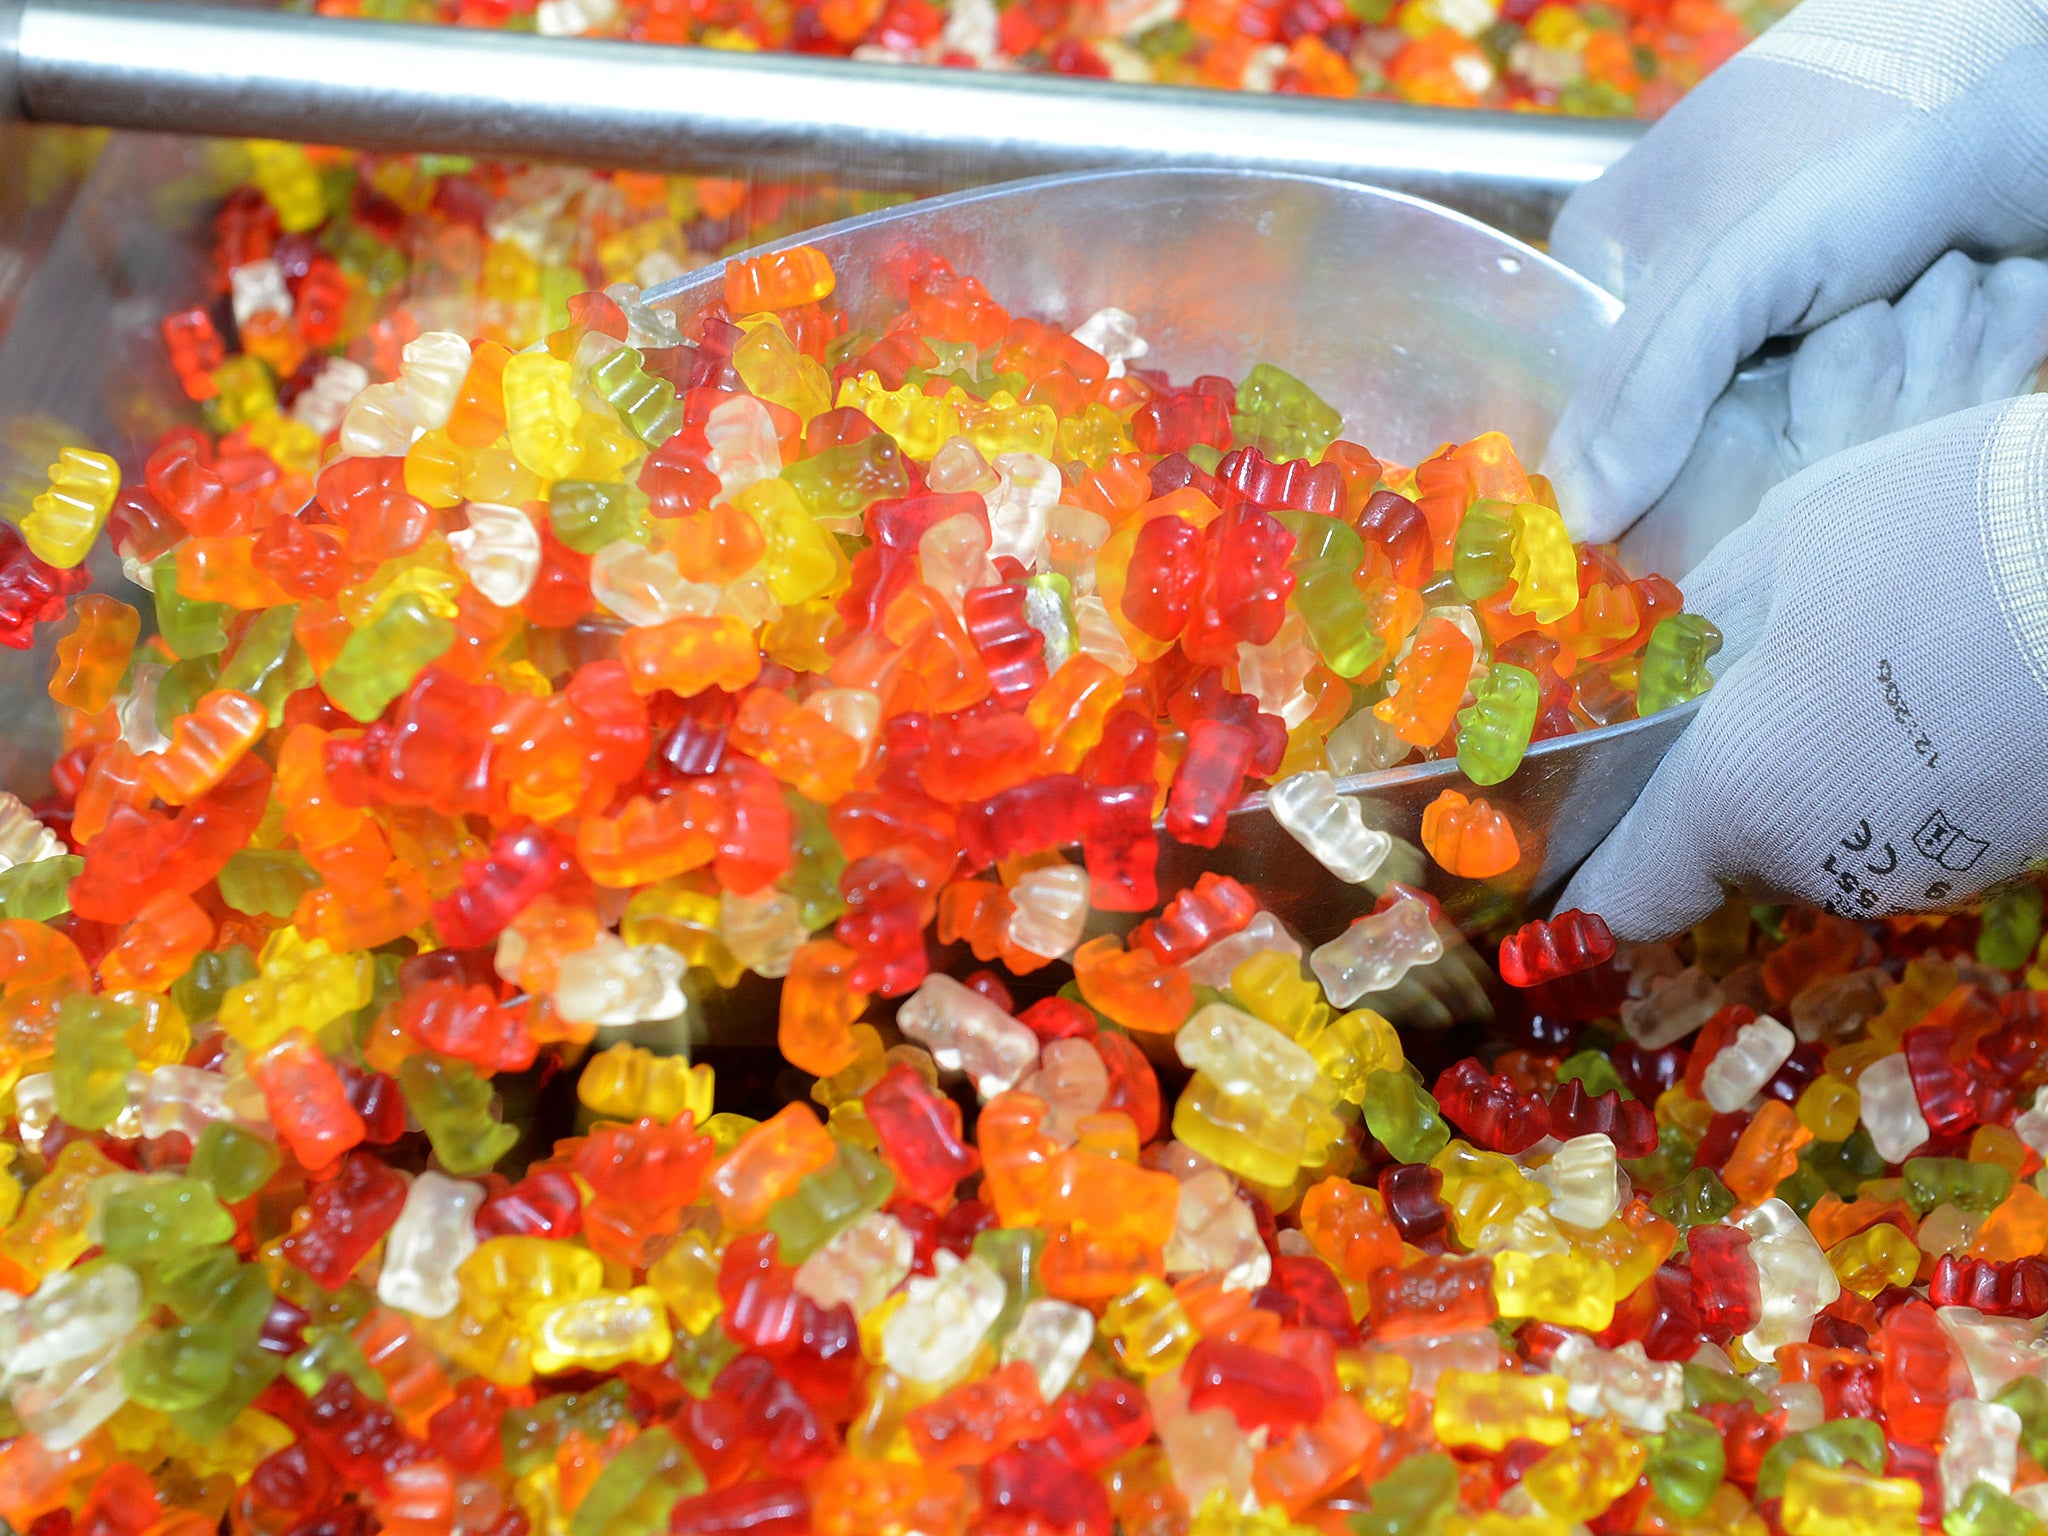 Haribo is the second largest sugar confectioner in the UK